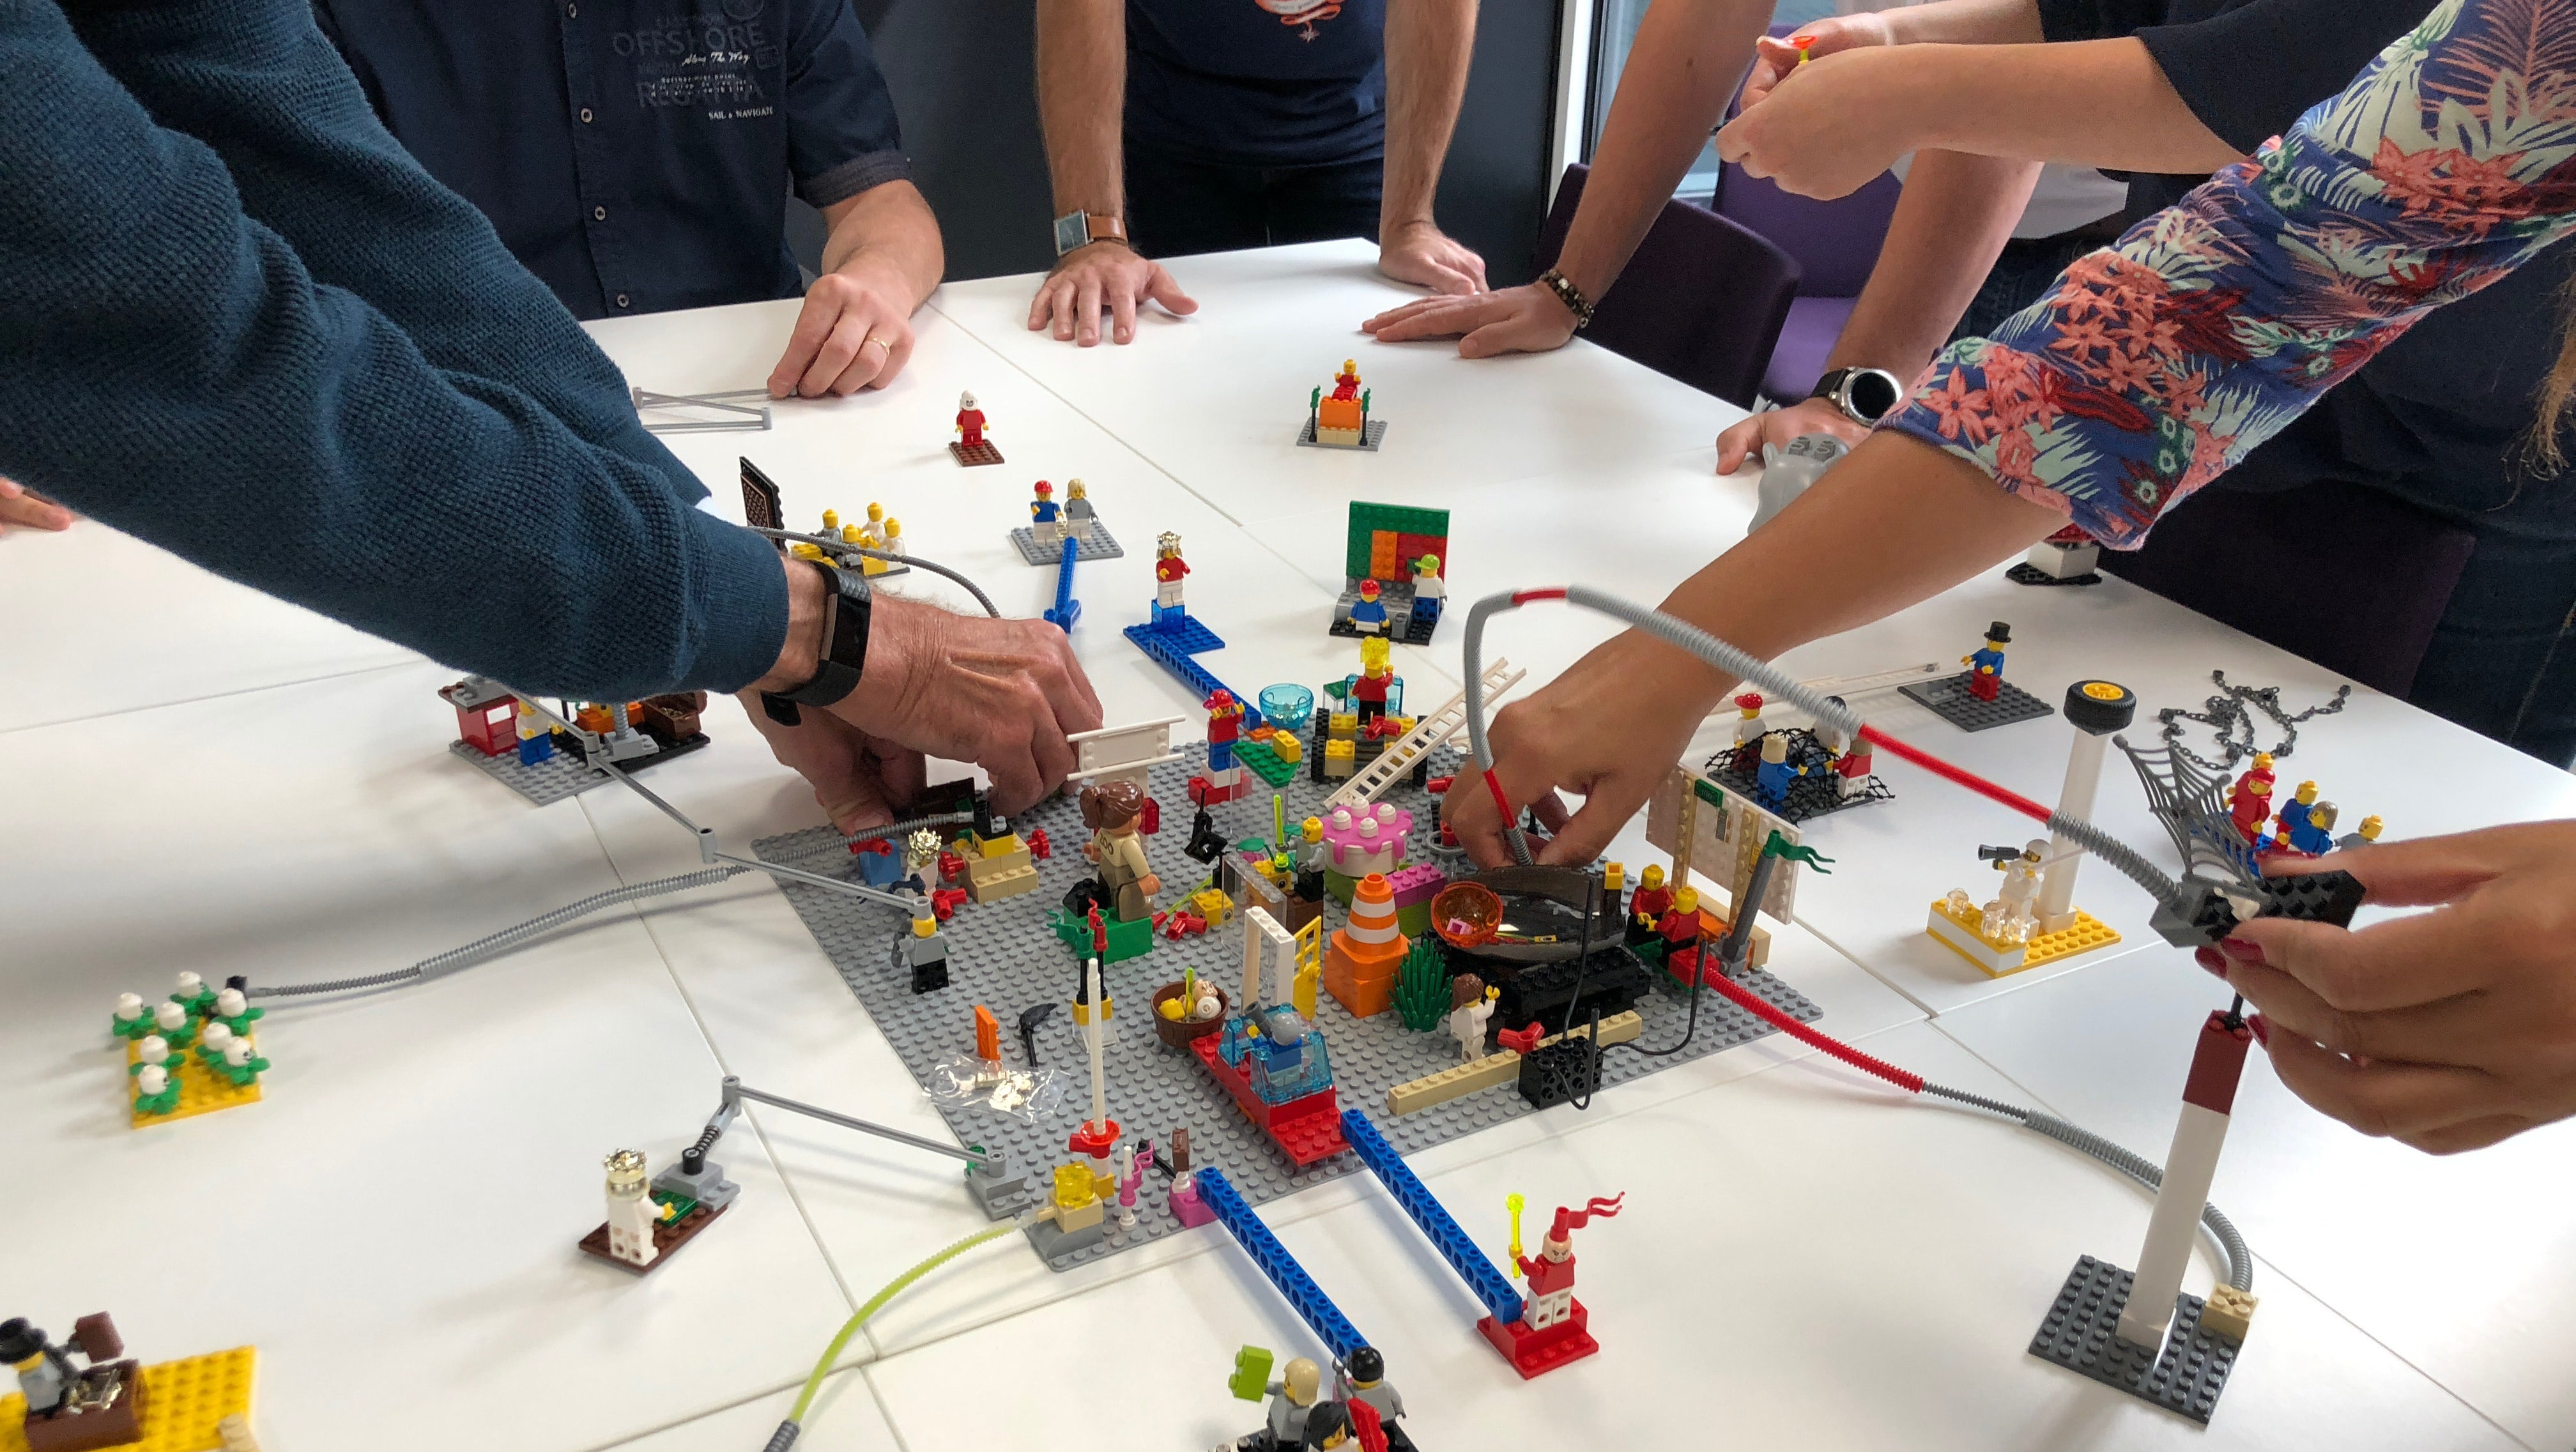 Participants of a LEGO® SERIOUS PLAY® workshop building connections and playing scenarios with models